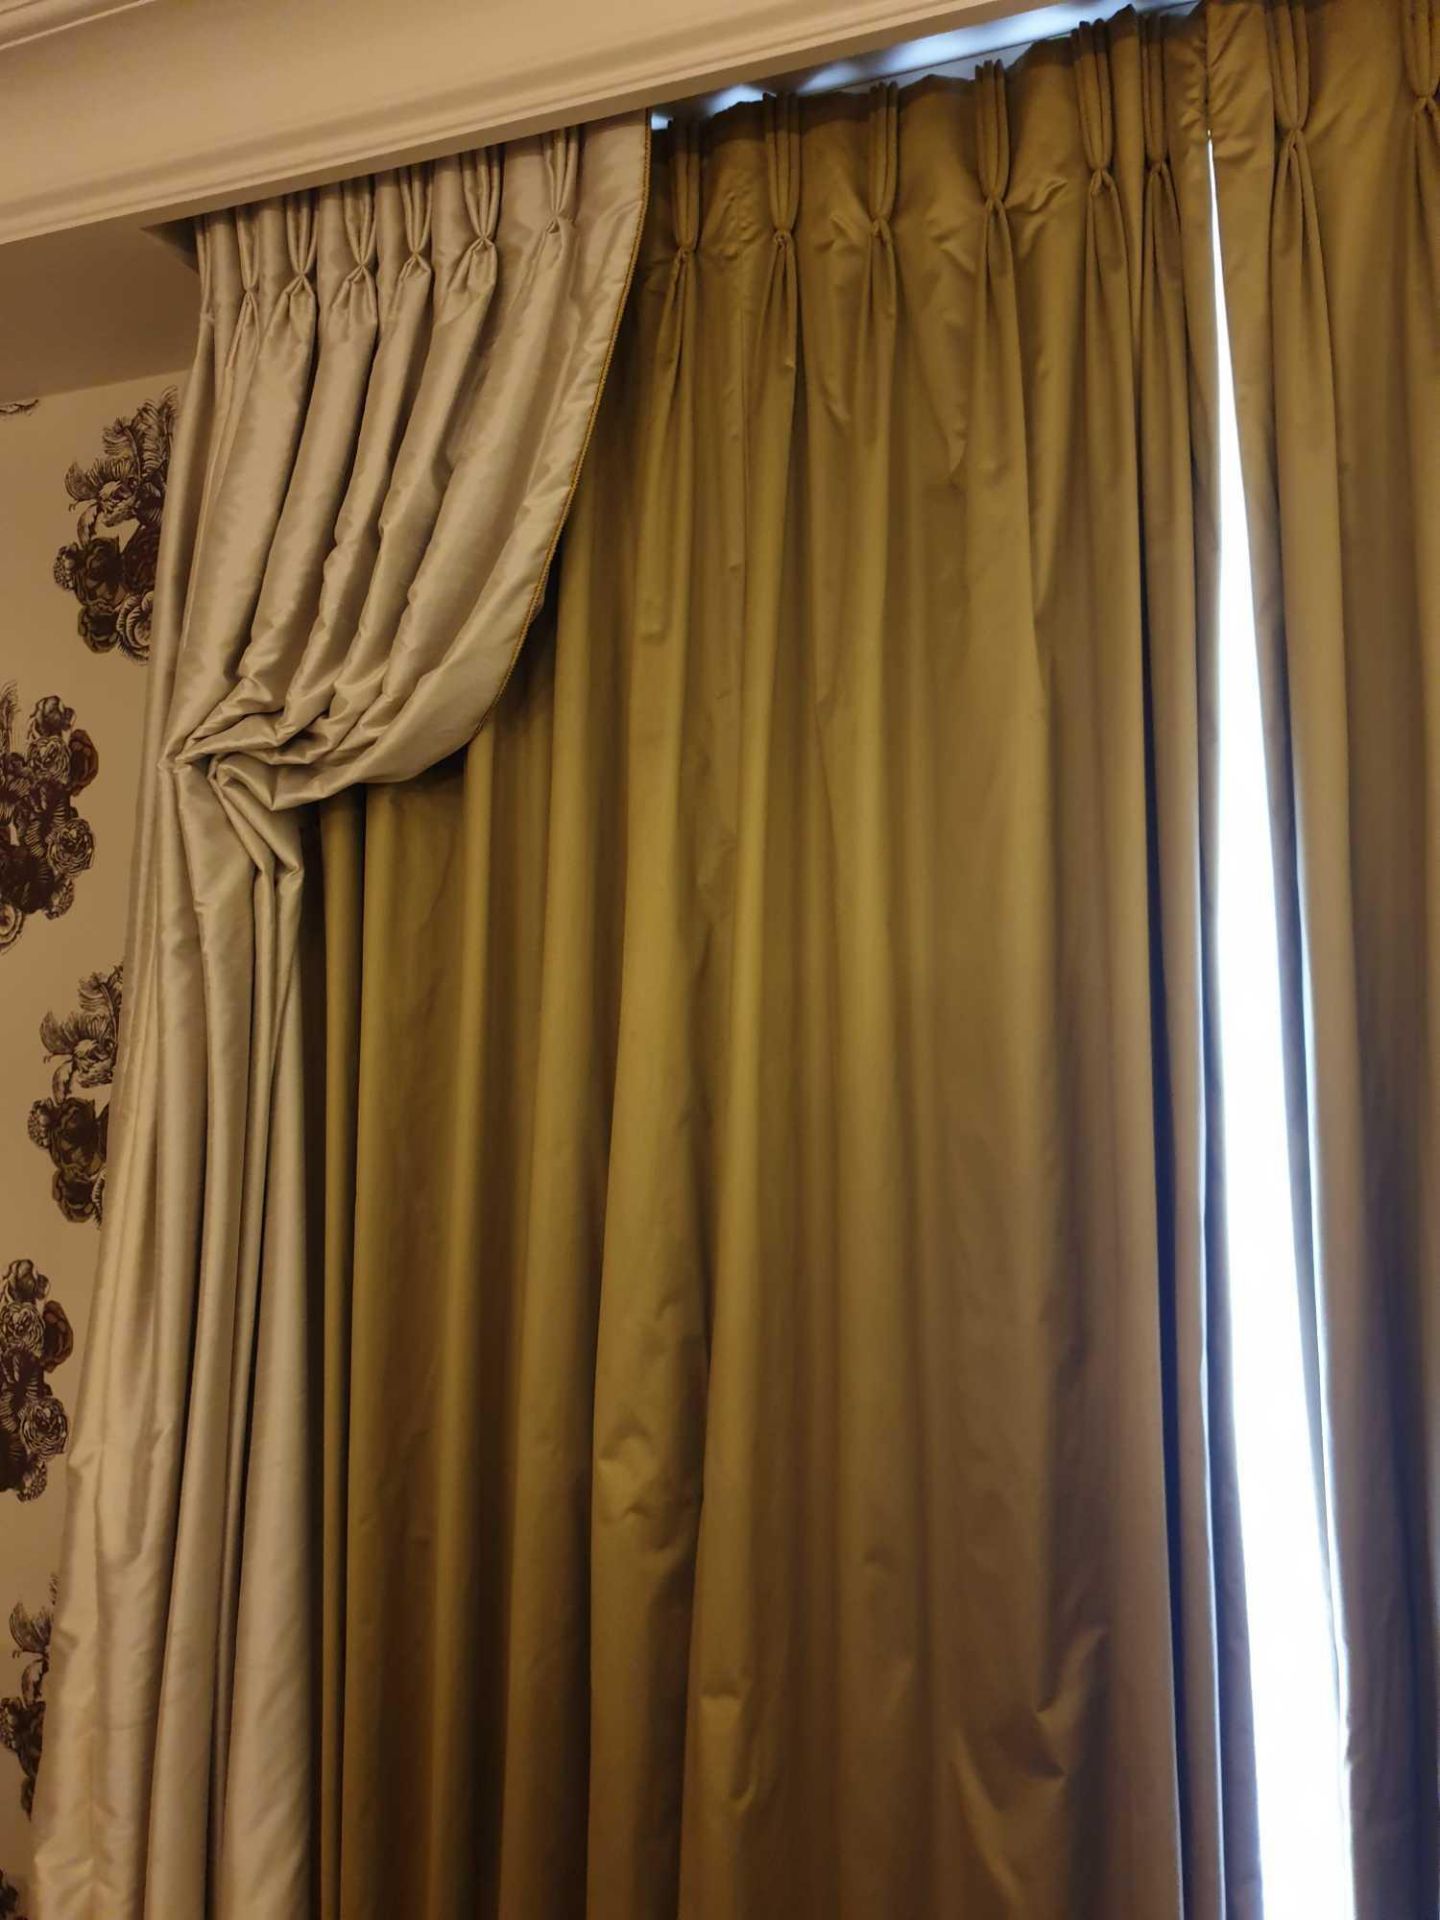 A Pair Of Silk Drapes Green And Grey With Trim 220 x 280cm (Room 730) - Image 2 of 2